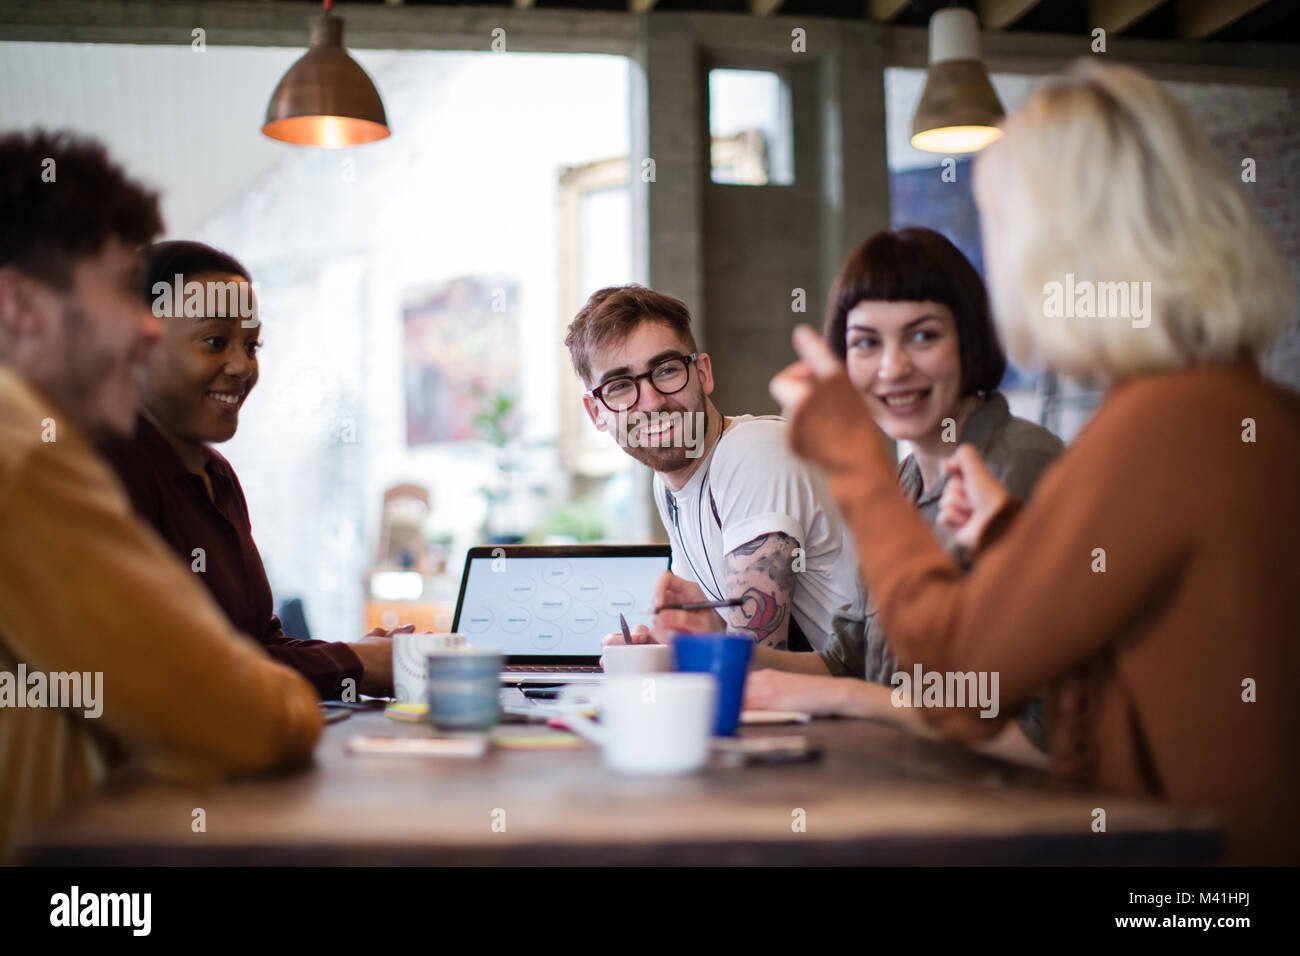 Group of young entrepreneurs in a meeting Stock Photo